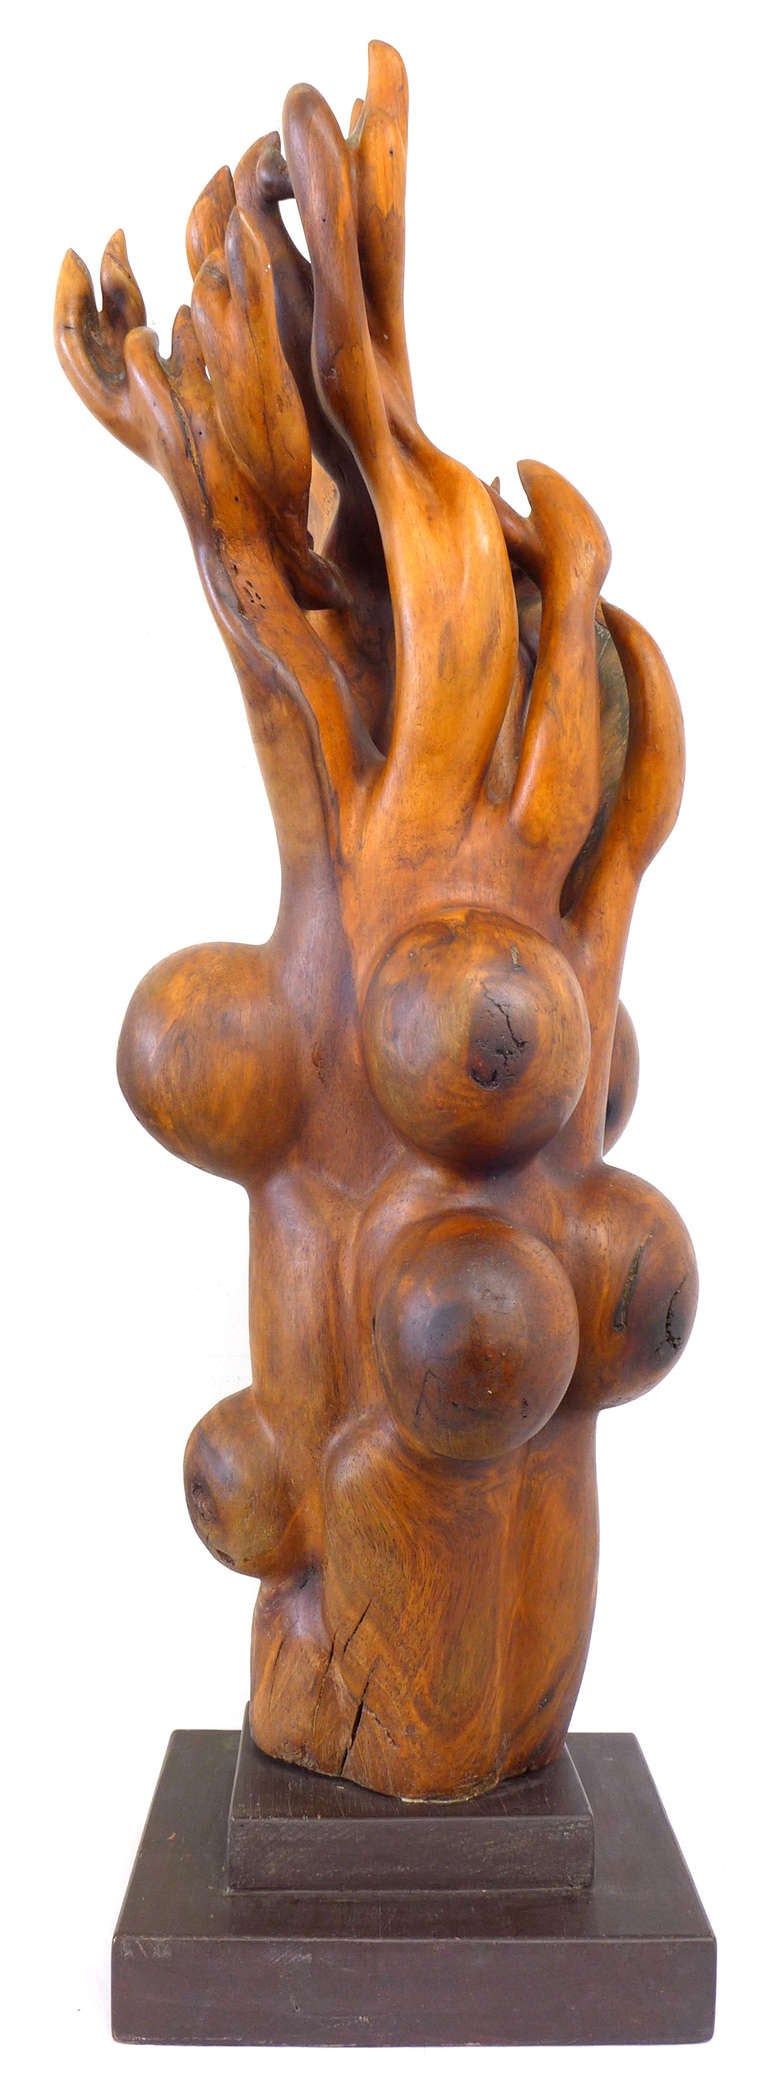 American Extraordinary Biomorphic Carved Wood Sculpture by Robin Spry Campbell